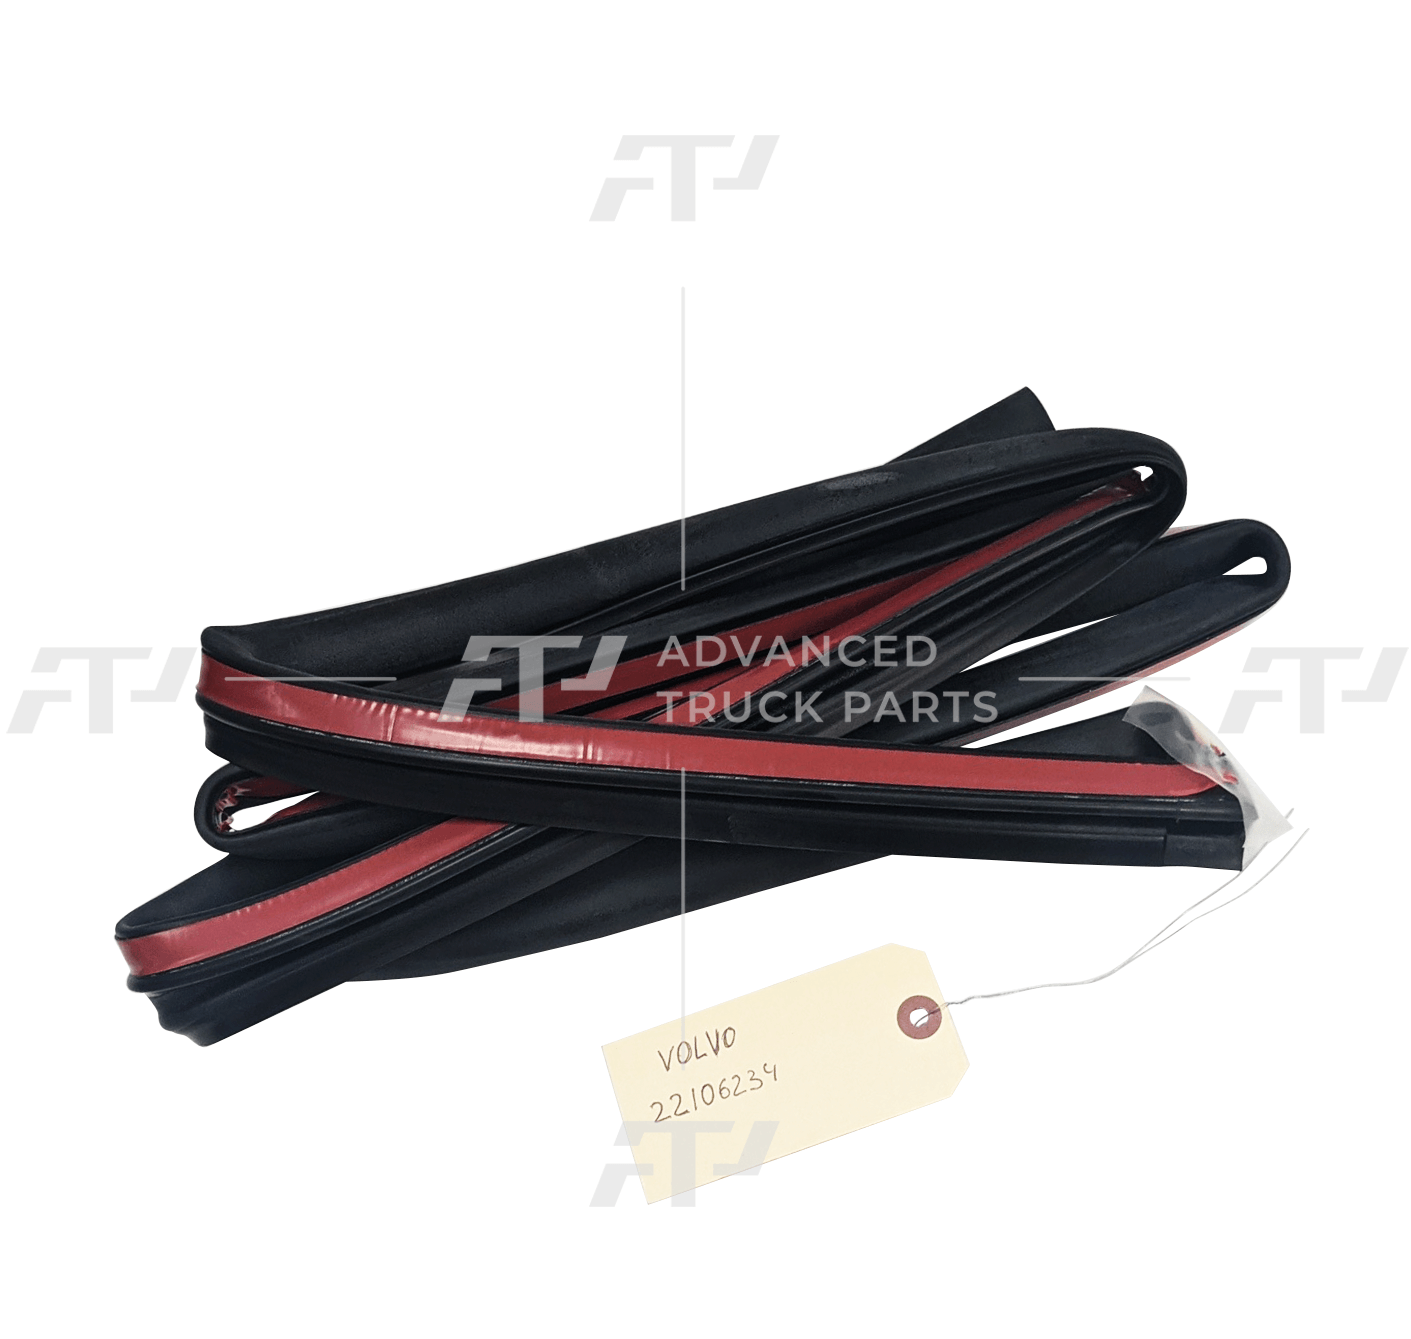 22106234 Genuine Volvo Seal Door Lh Outer For Volvo Fm12 Truck - ADVANCED TRUCK PARTS